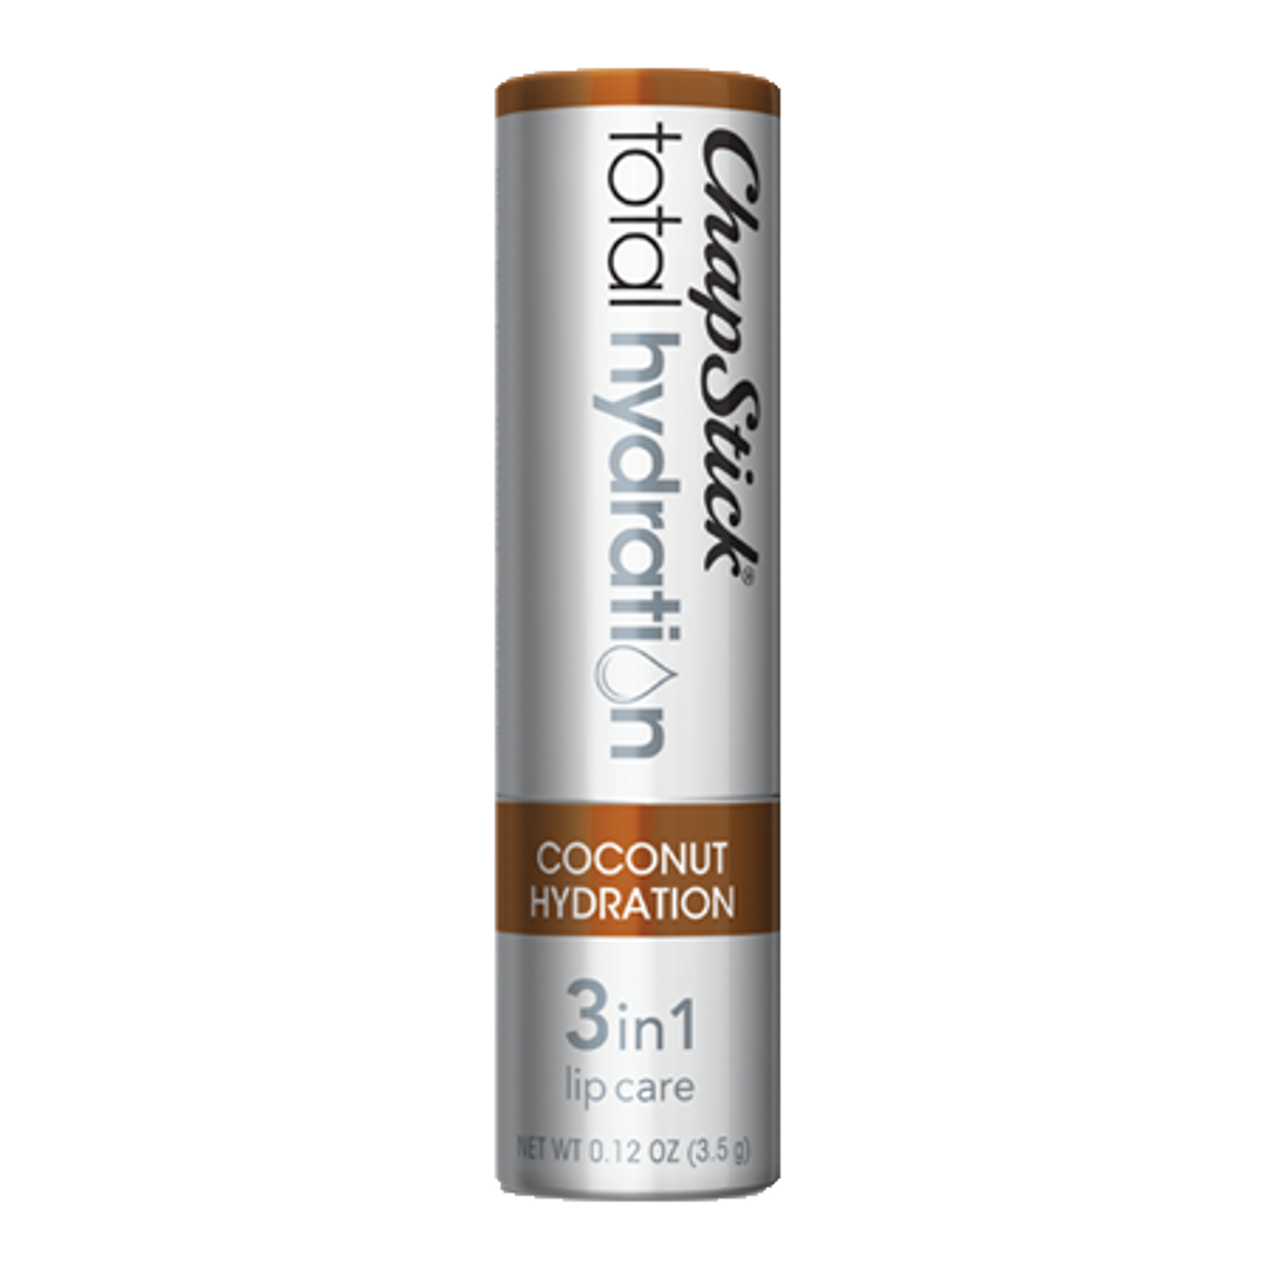 ChapStick Total Hydration Coconut Hydration